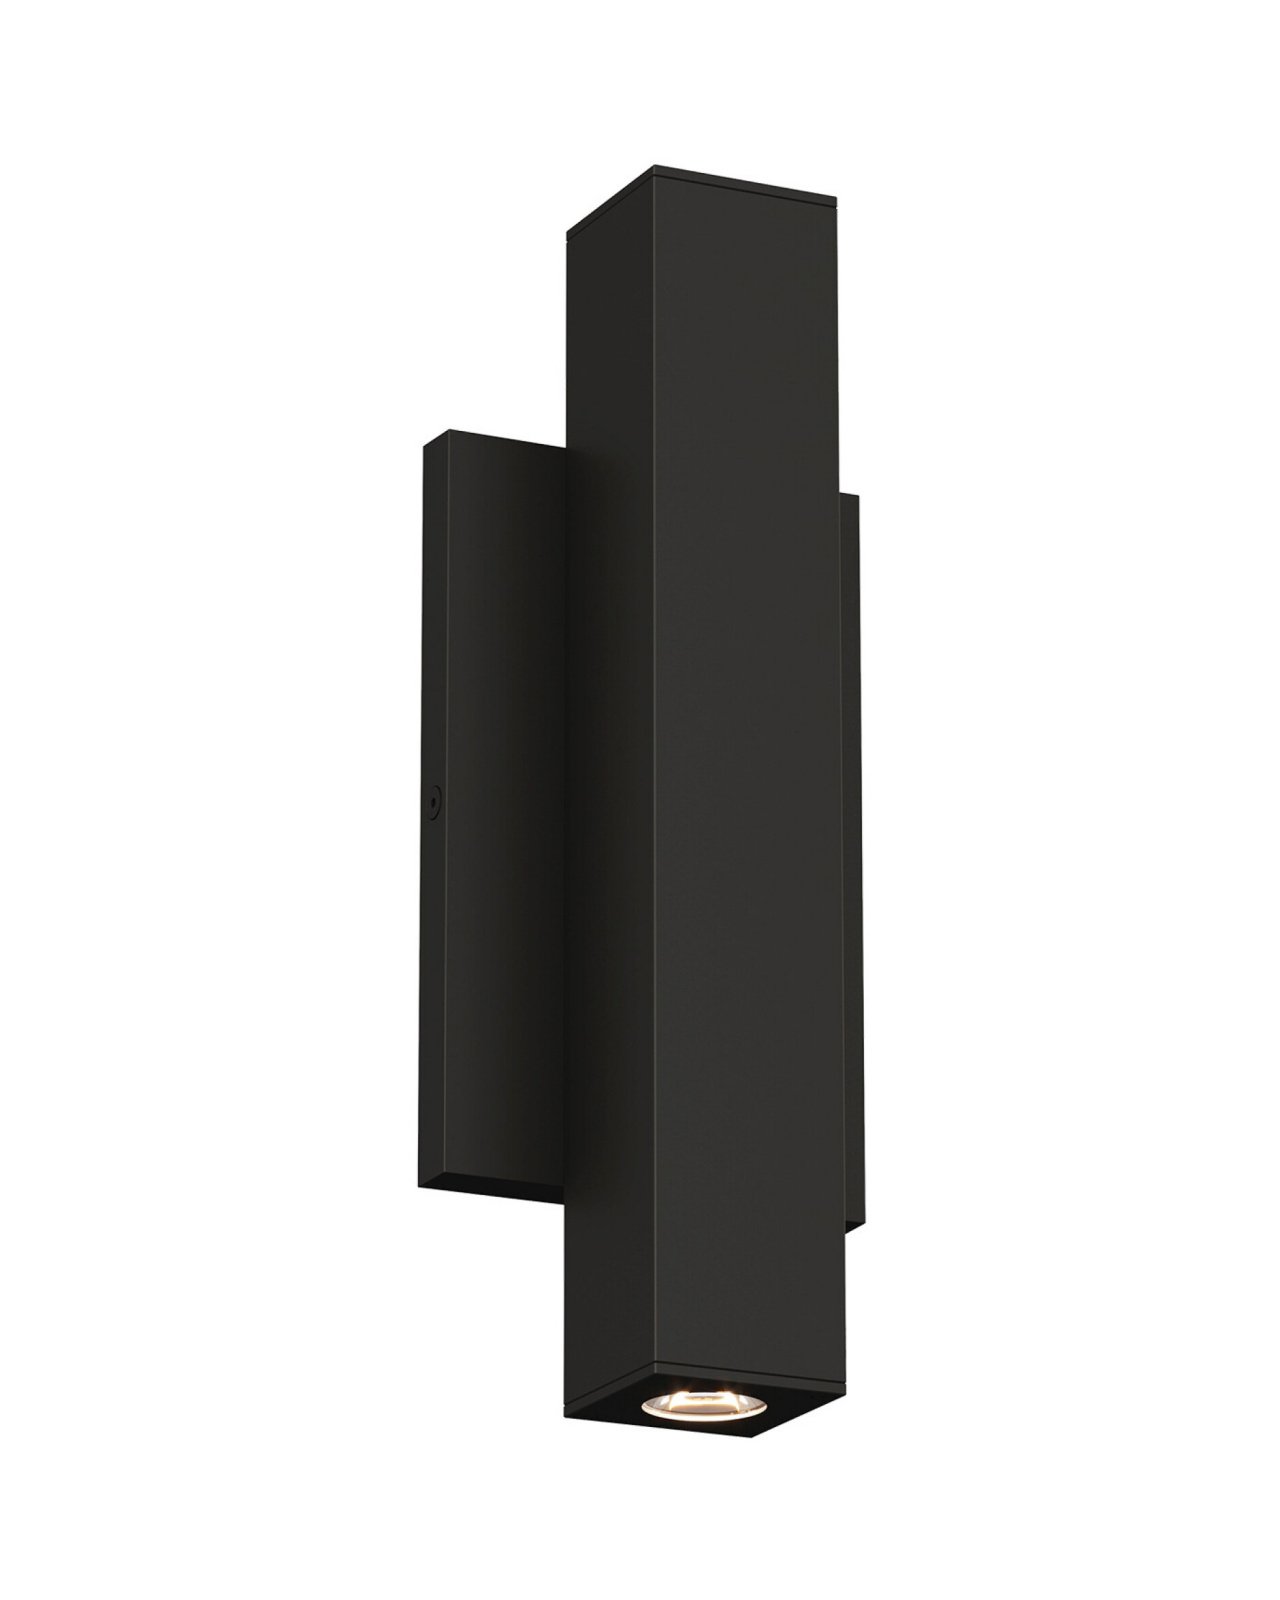 Chara 12" Square Outdoor Wall Sconce Black